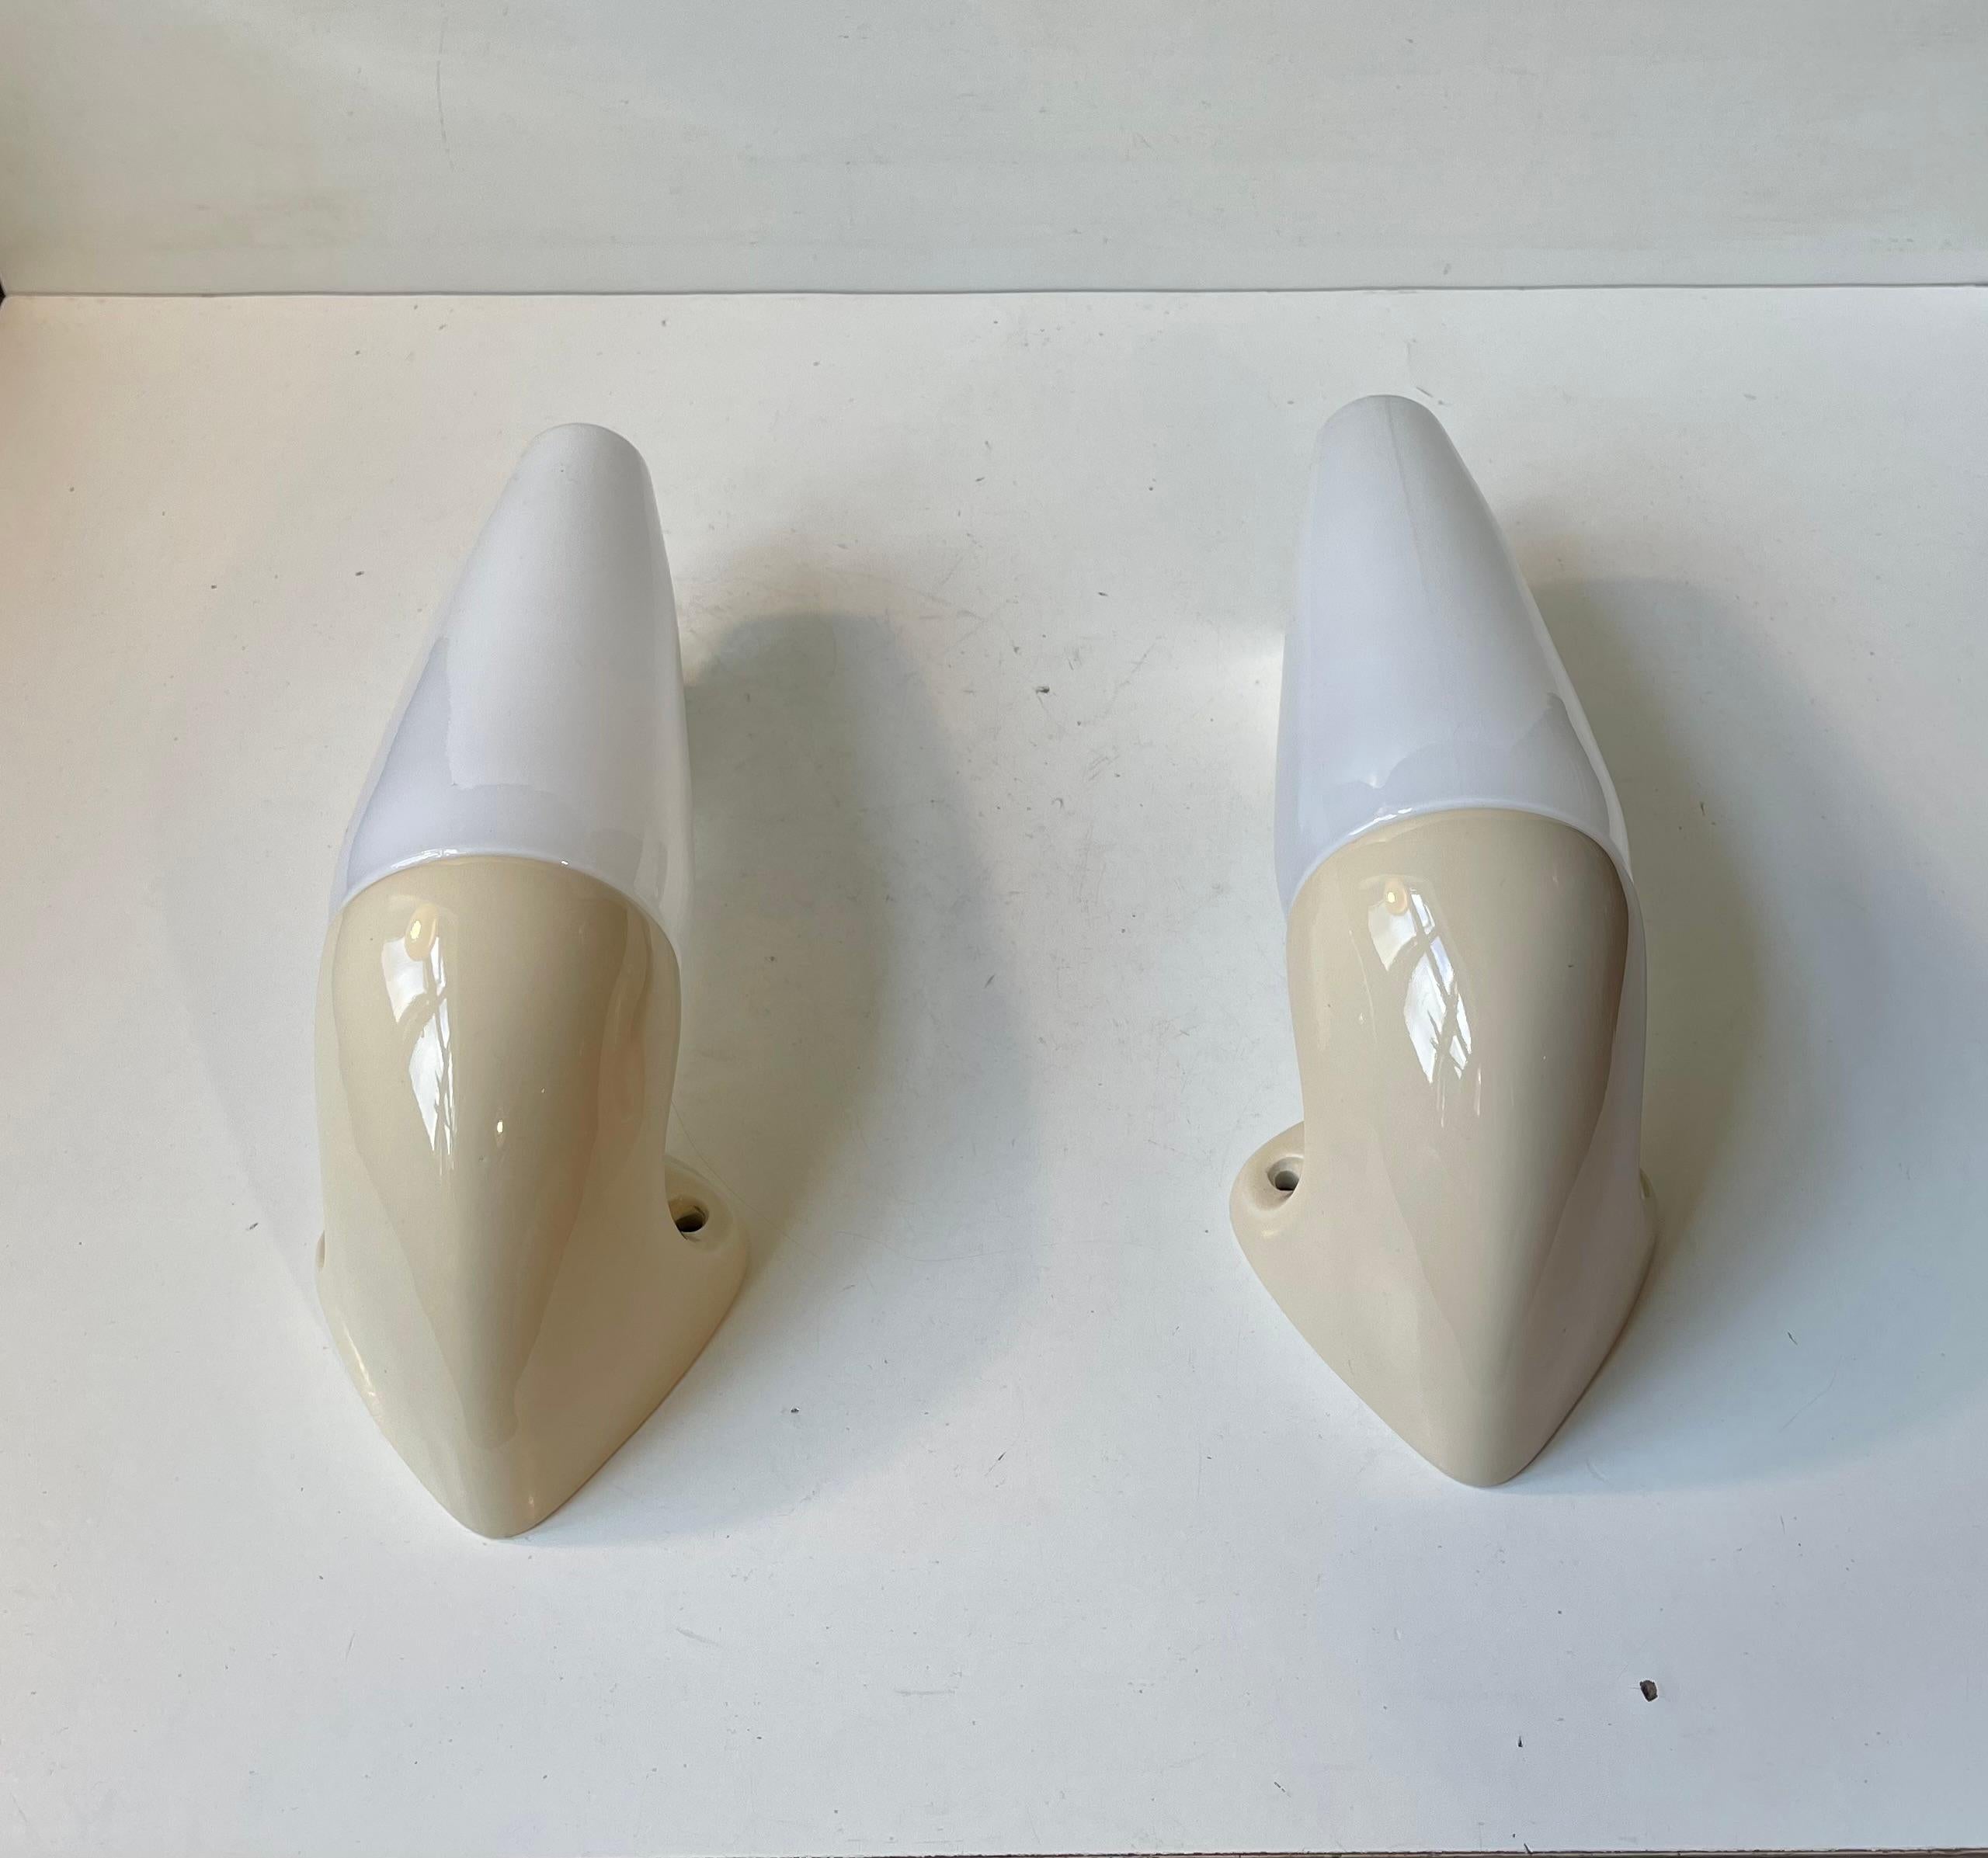 A pair of sconces suitable as bathroom or outdoor lighting. They were designed by the Swedish Prince Sigvard Bernadotte for the swedish company Ifö during the 1960s. Pastel cream glazed porcelain mounts with white opaline glass shading. 2 way mount